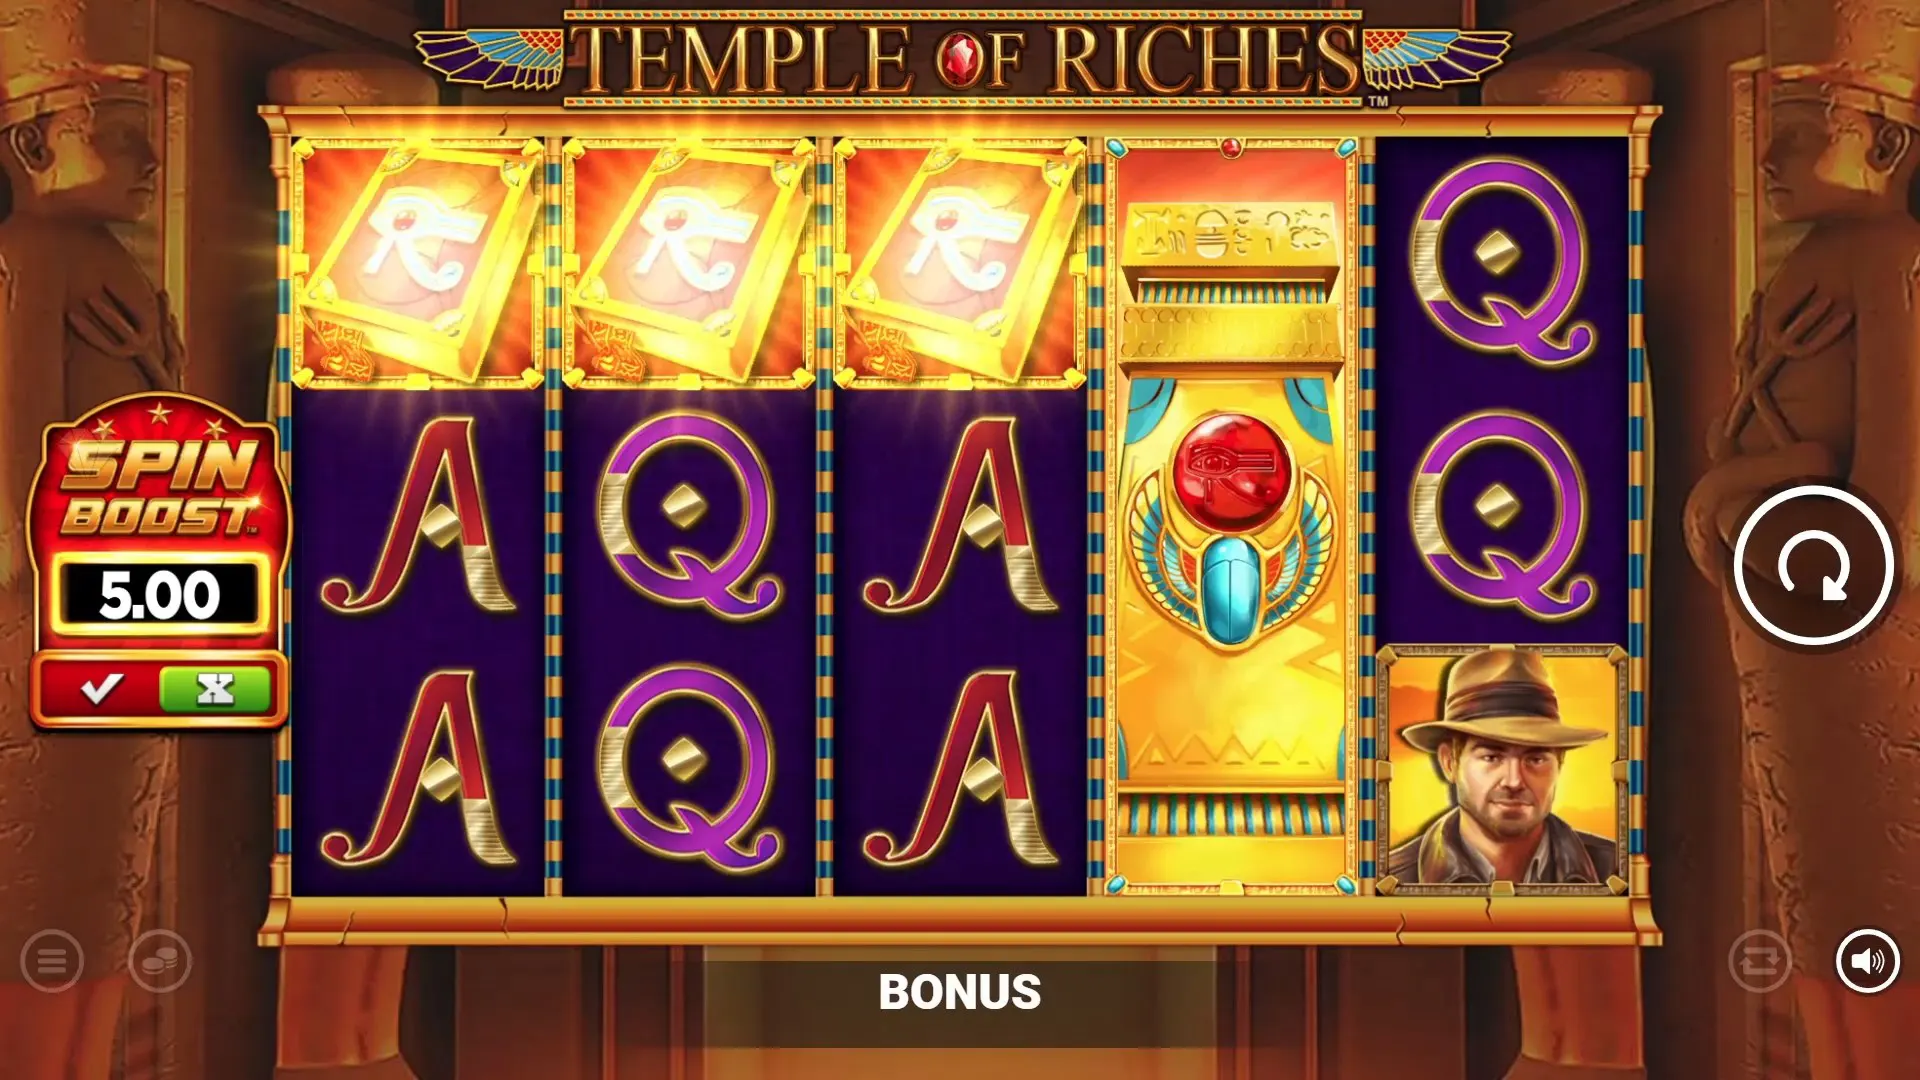 Temple of Riches Spin Boost demo play